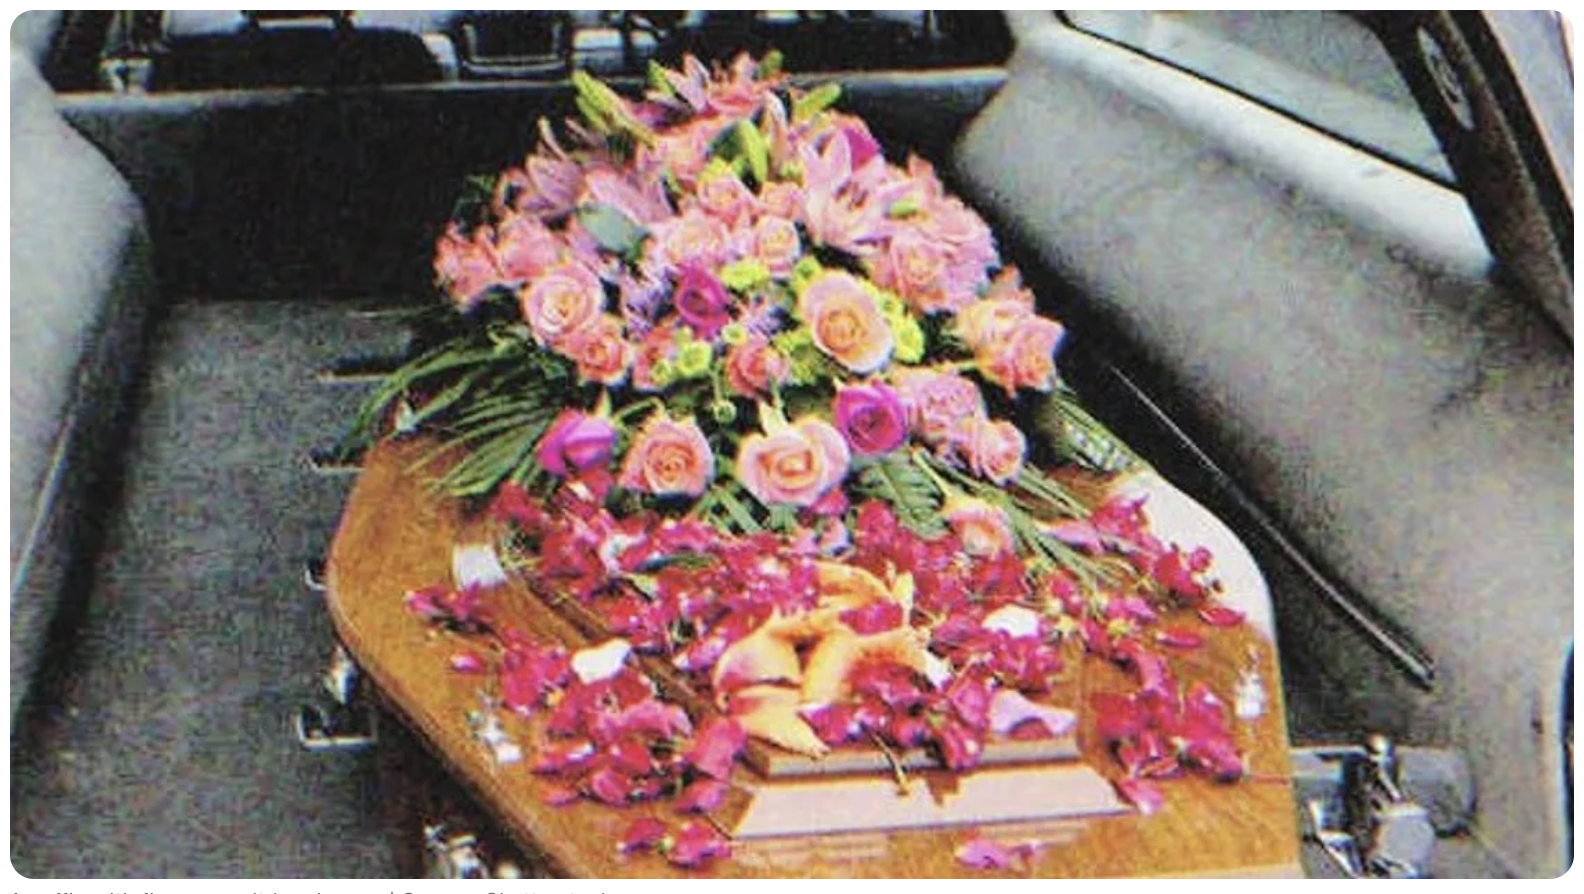 A coffin with flowers on it in a hearse | Source: Shutterstock